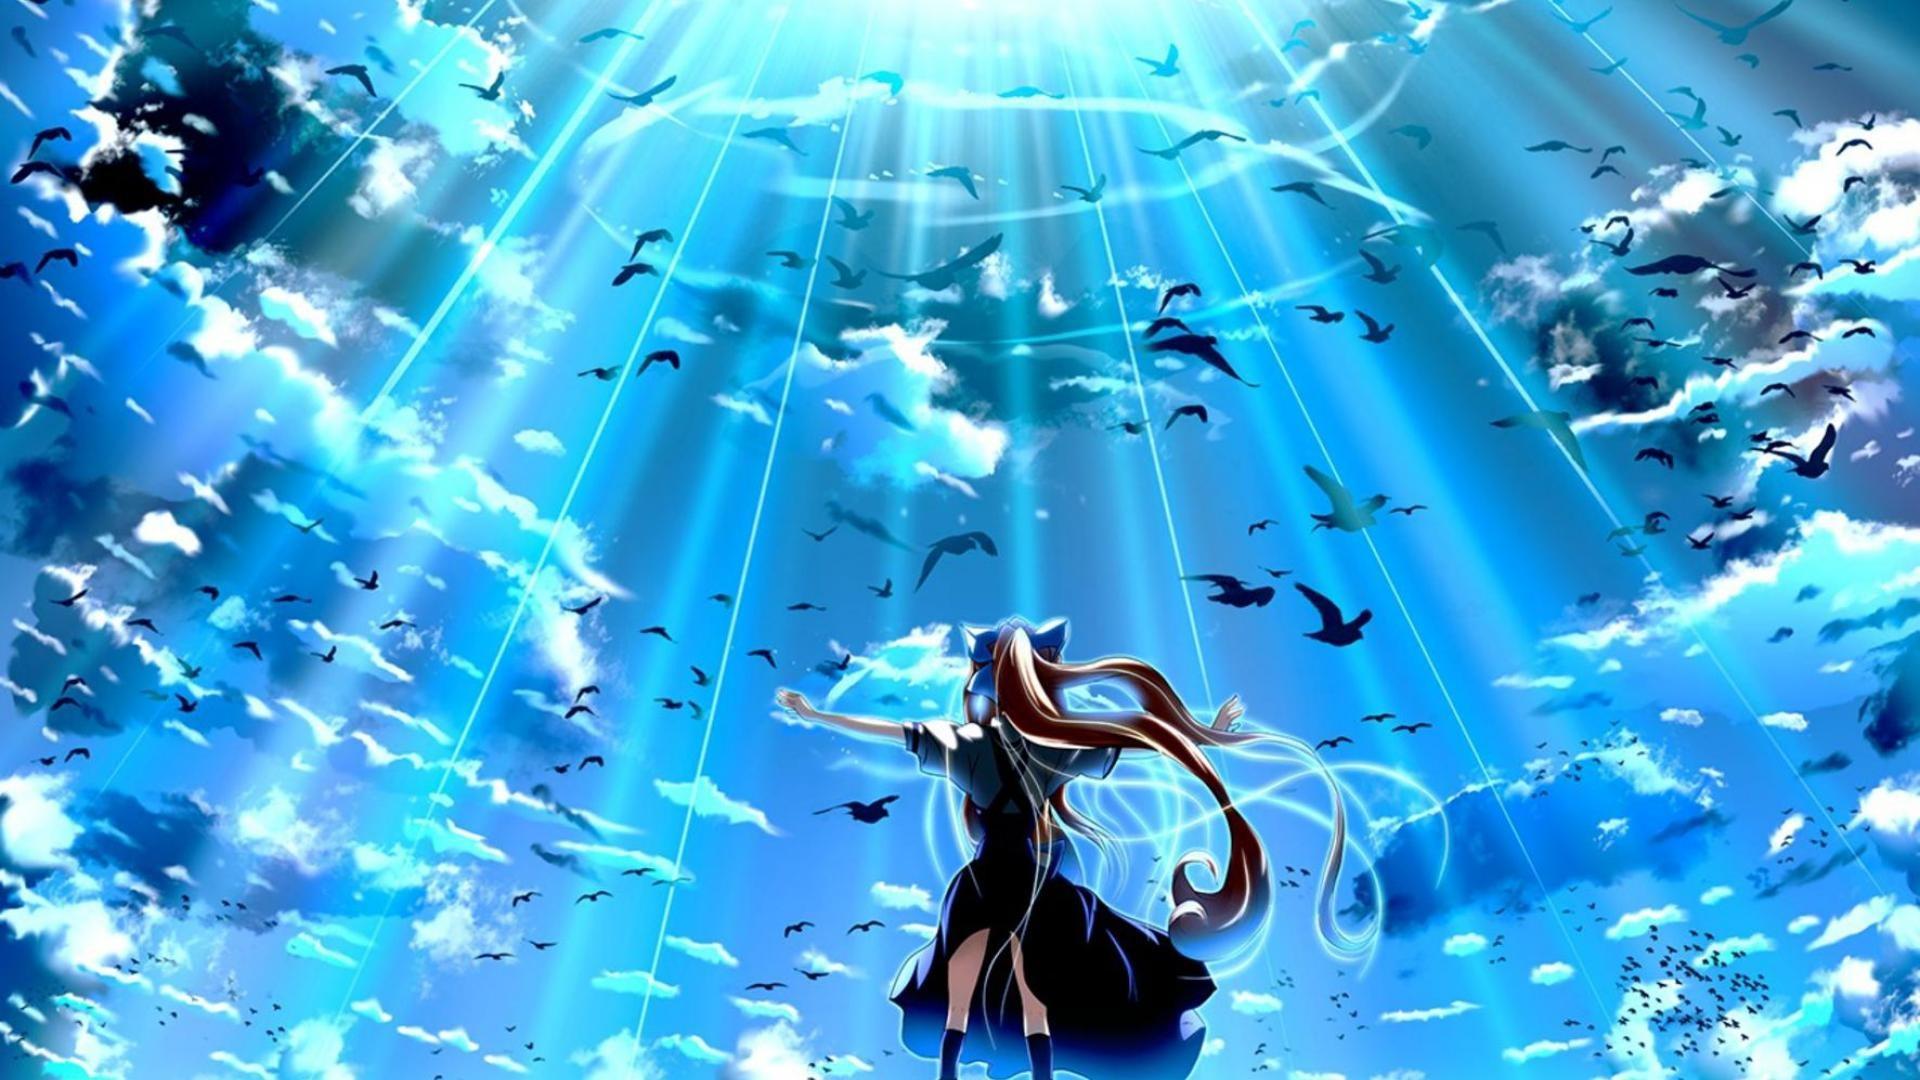 Anime girl in the sky surrounded by birds - Blue anime